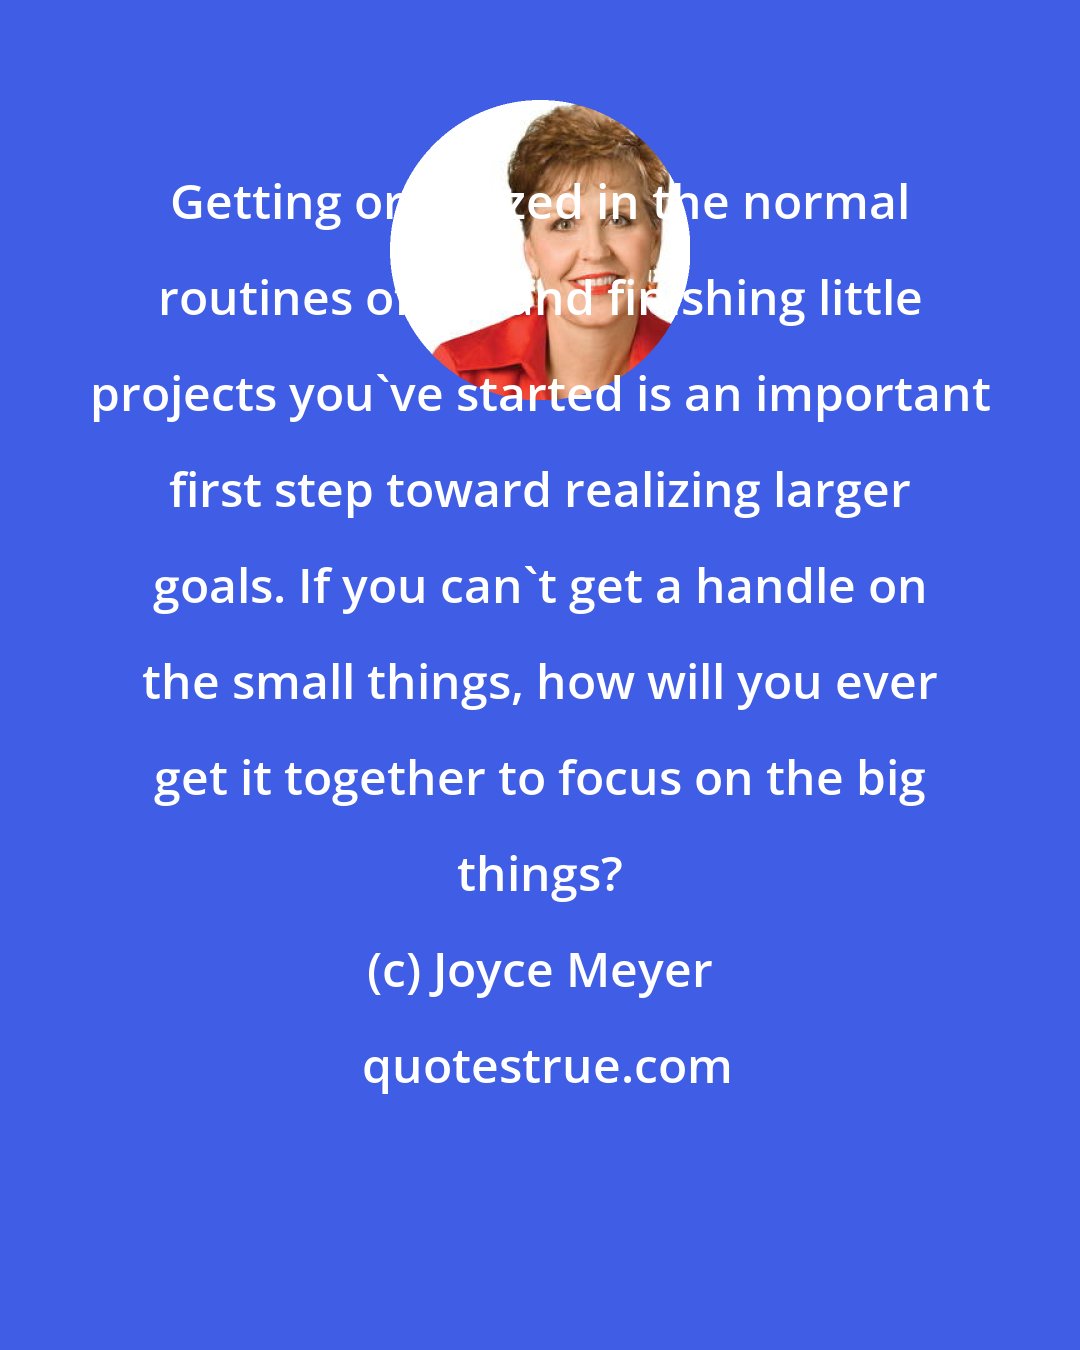 Joyce Meyer: Getting organized in the normal routines of life and finishing little projects you've started is an important first step toward realizing larger goals. If you can't get a handle on the small things, how will you ever get it together to focus on the big things?